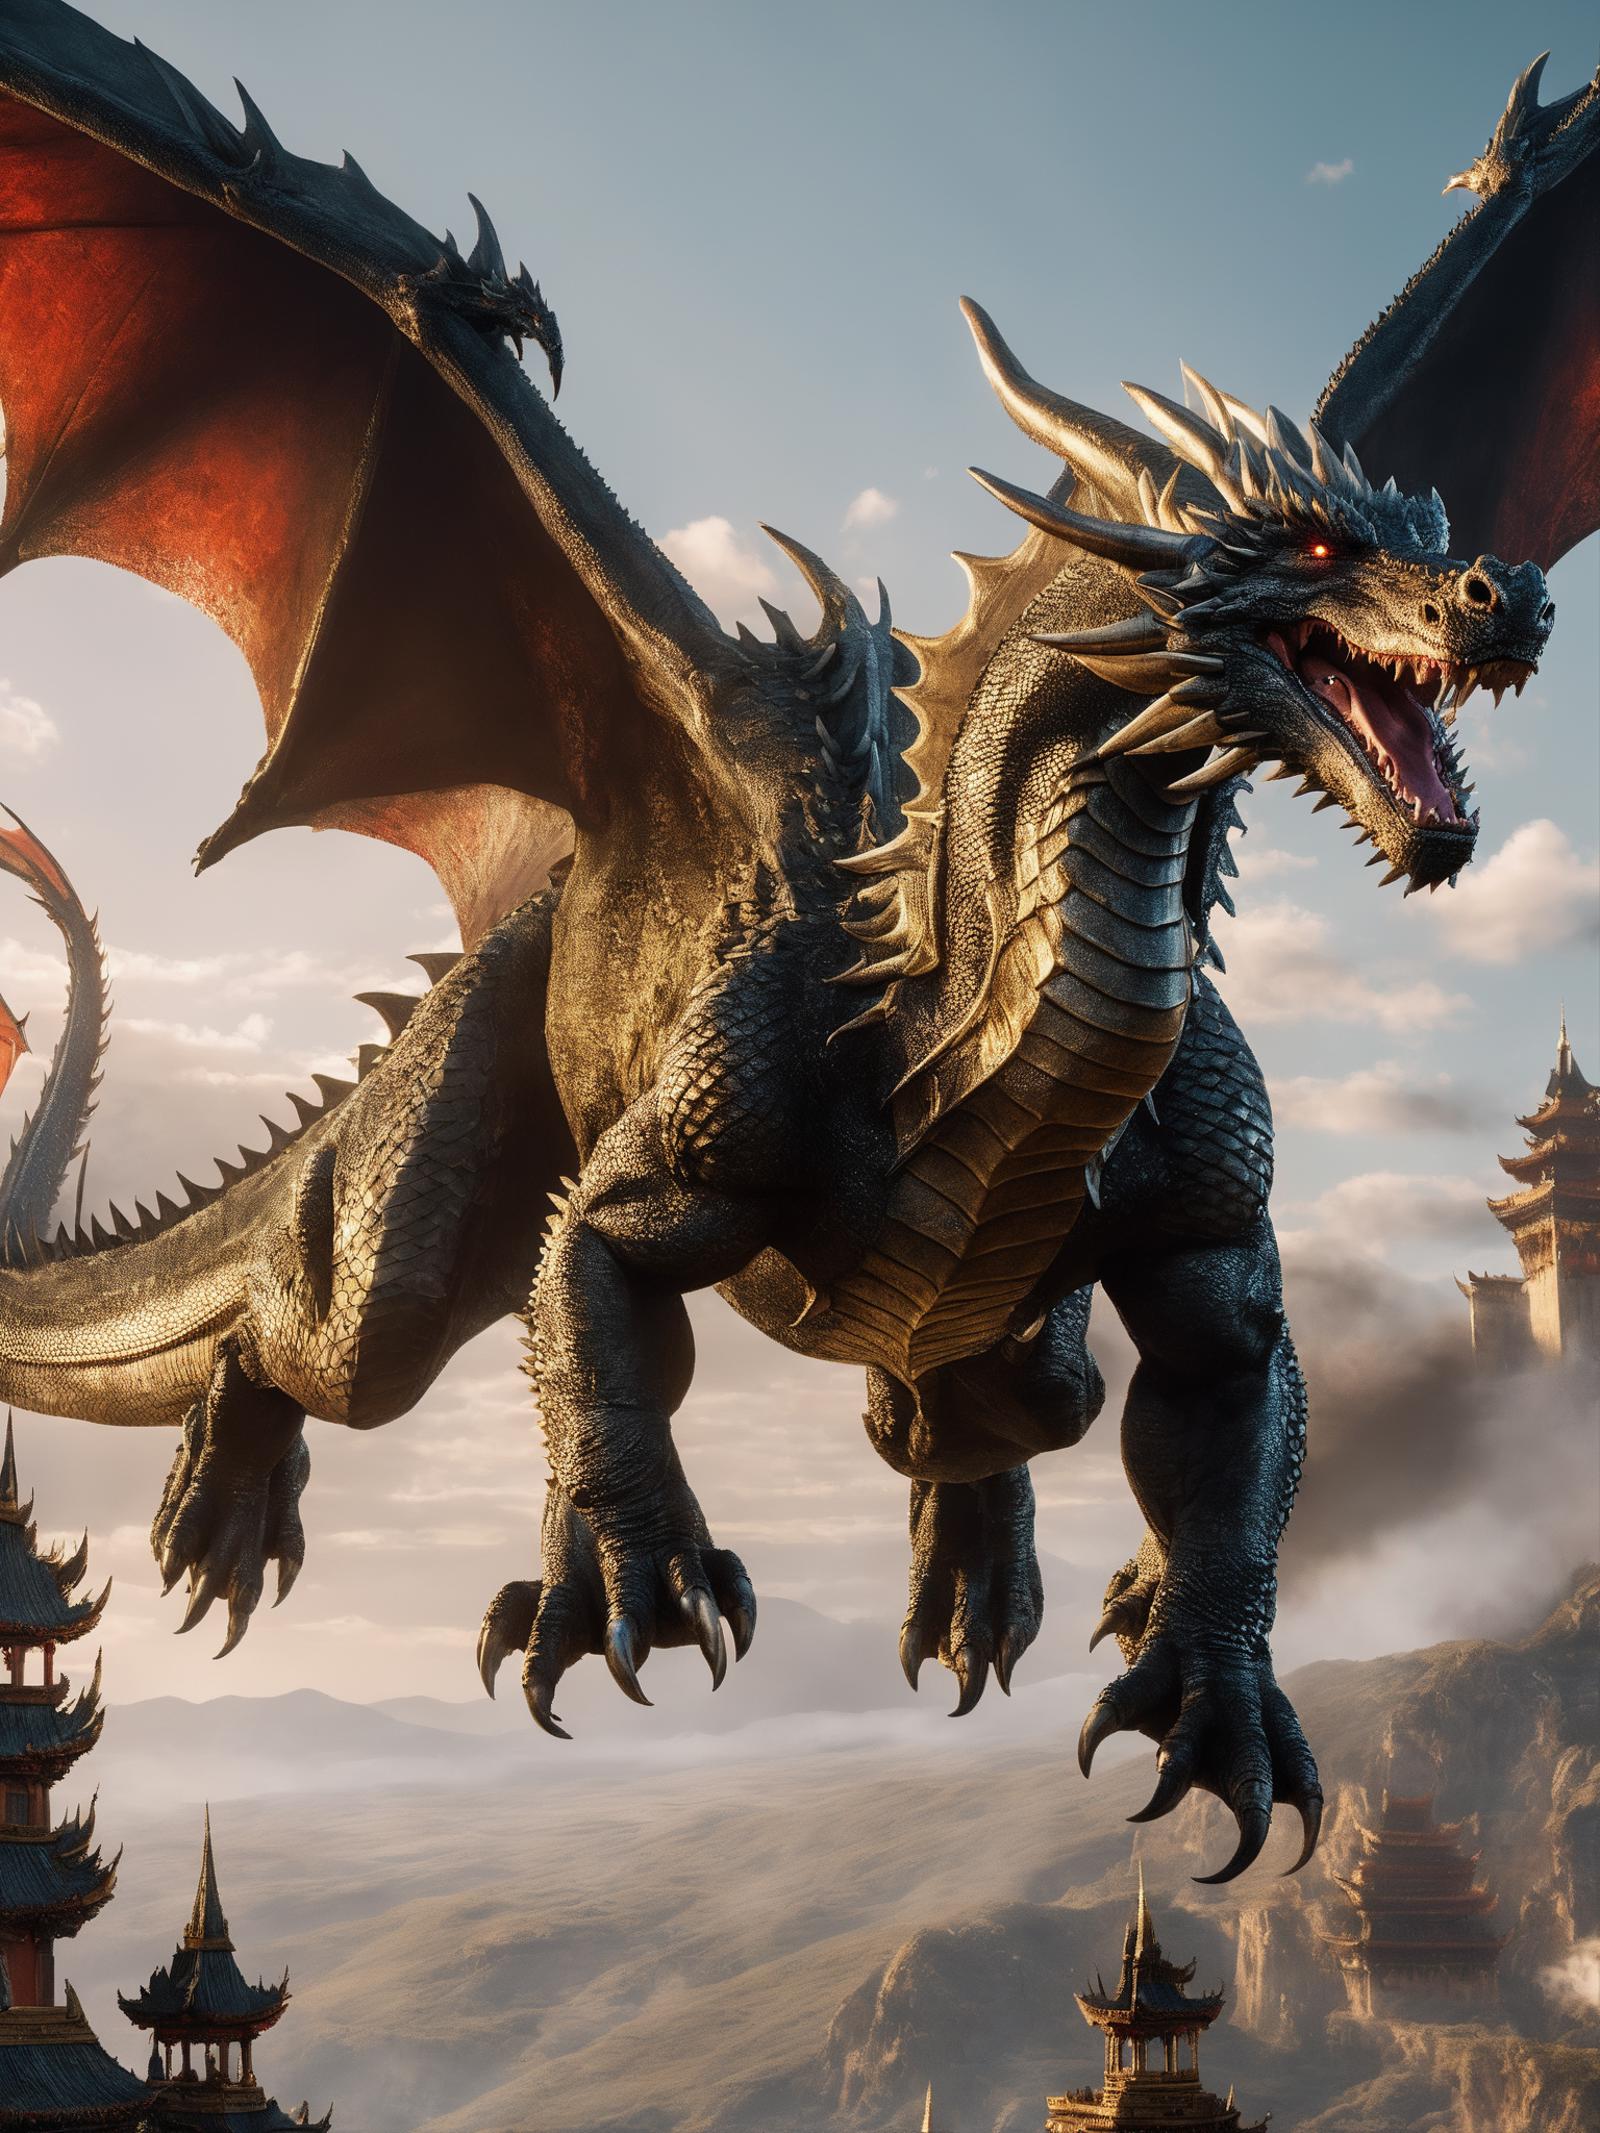 A digital art image of a large dragon with a fierce expression and its mouth open, standing in front of a castle-like structure.